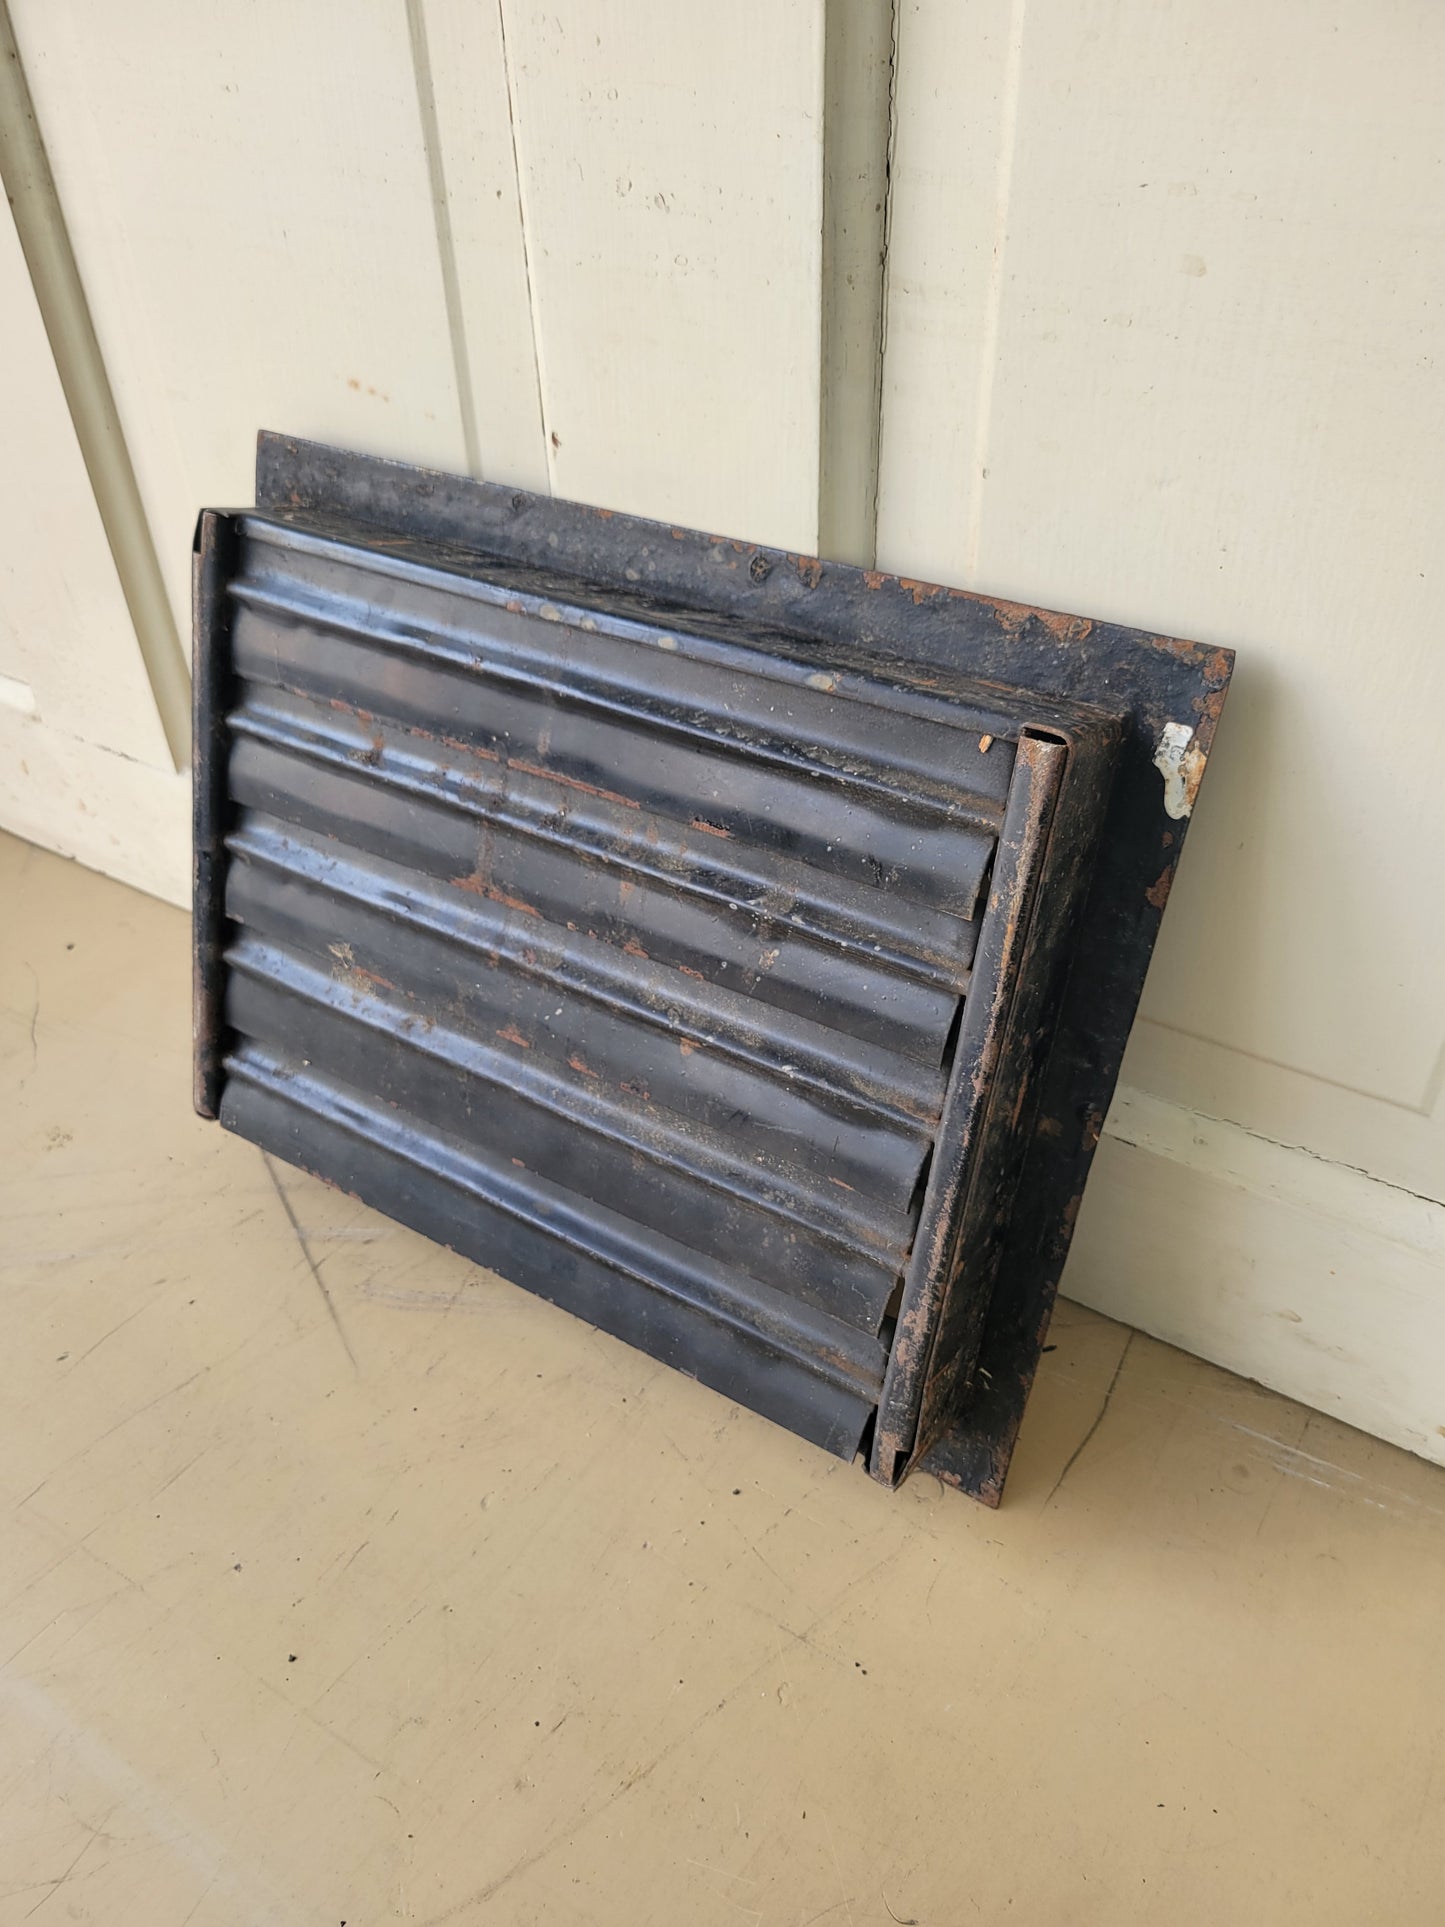 11 x 14 Antique Cast Iron Working Vent Cover, Floor Register Cover with Dampers #031802